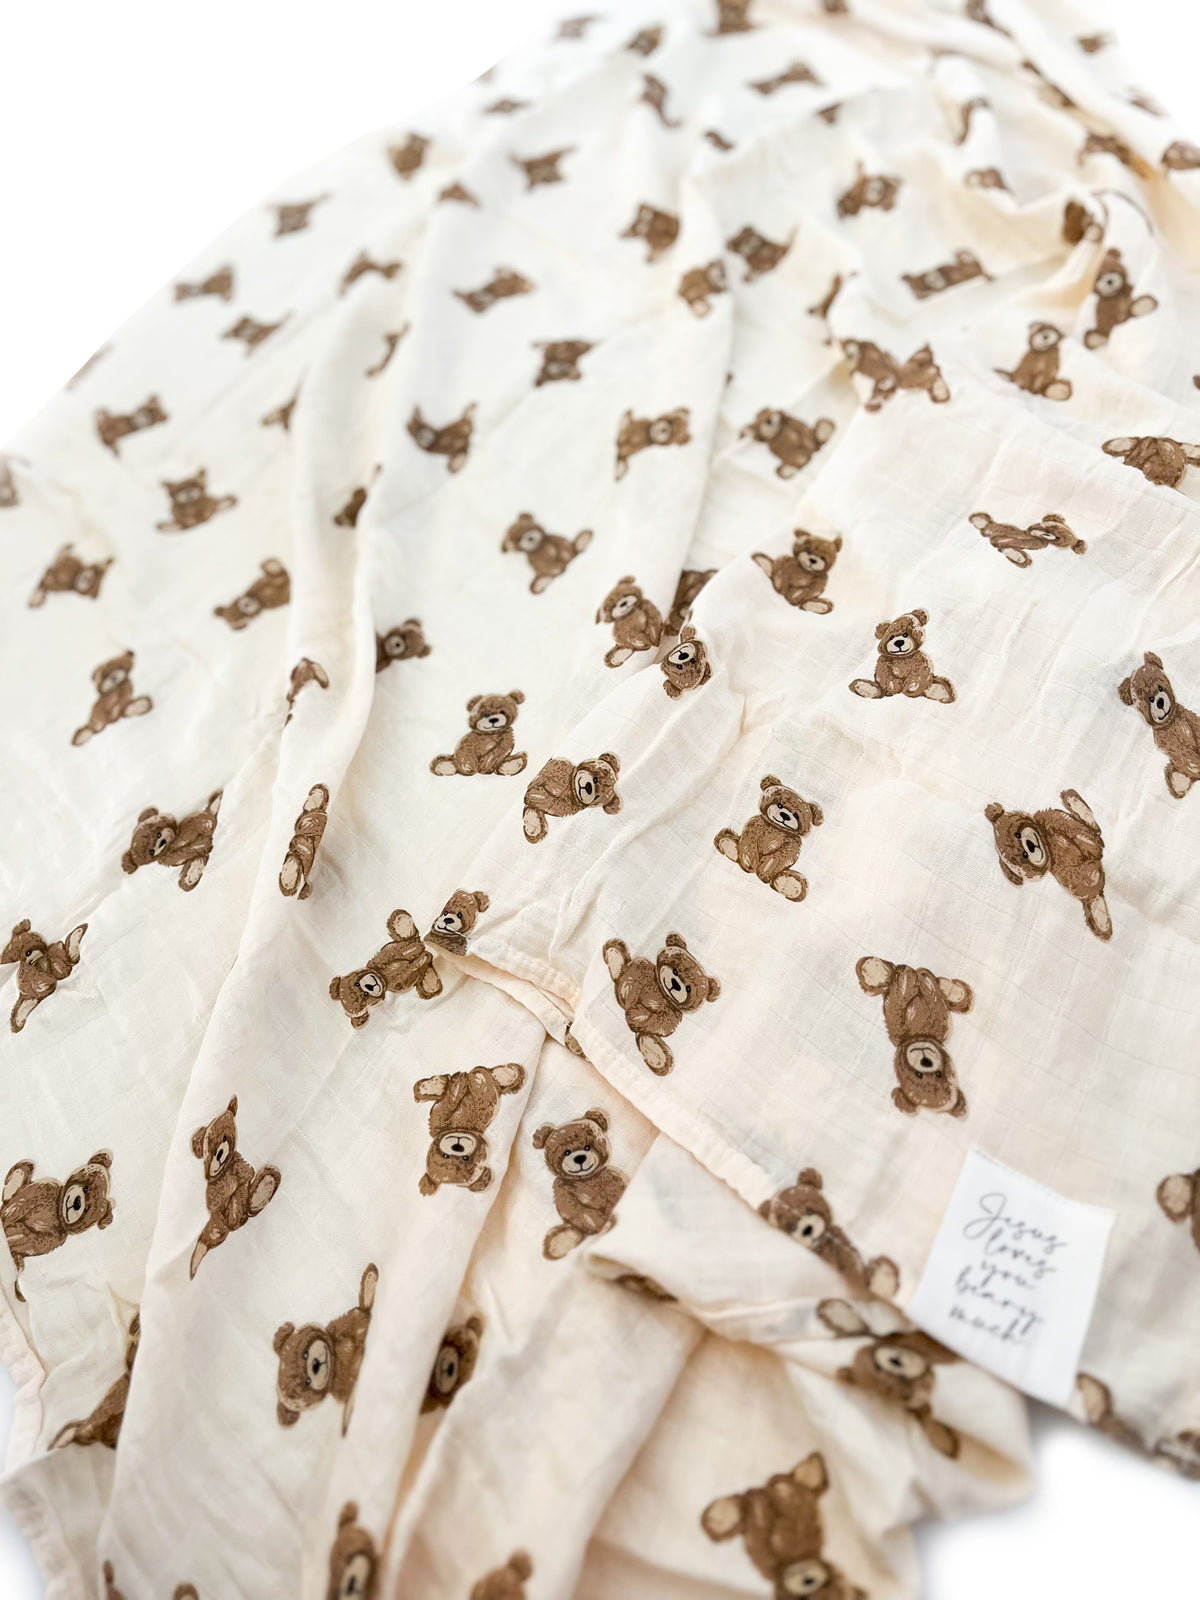 Jesus Loves You Beary Much Swaddle Blanket